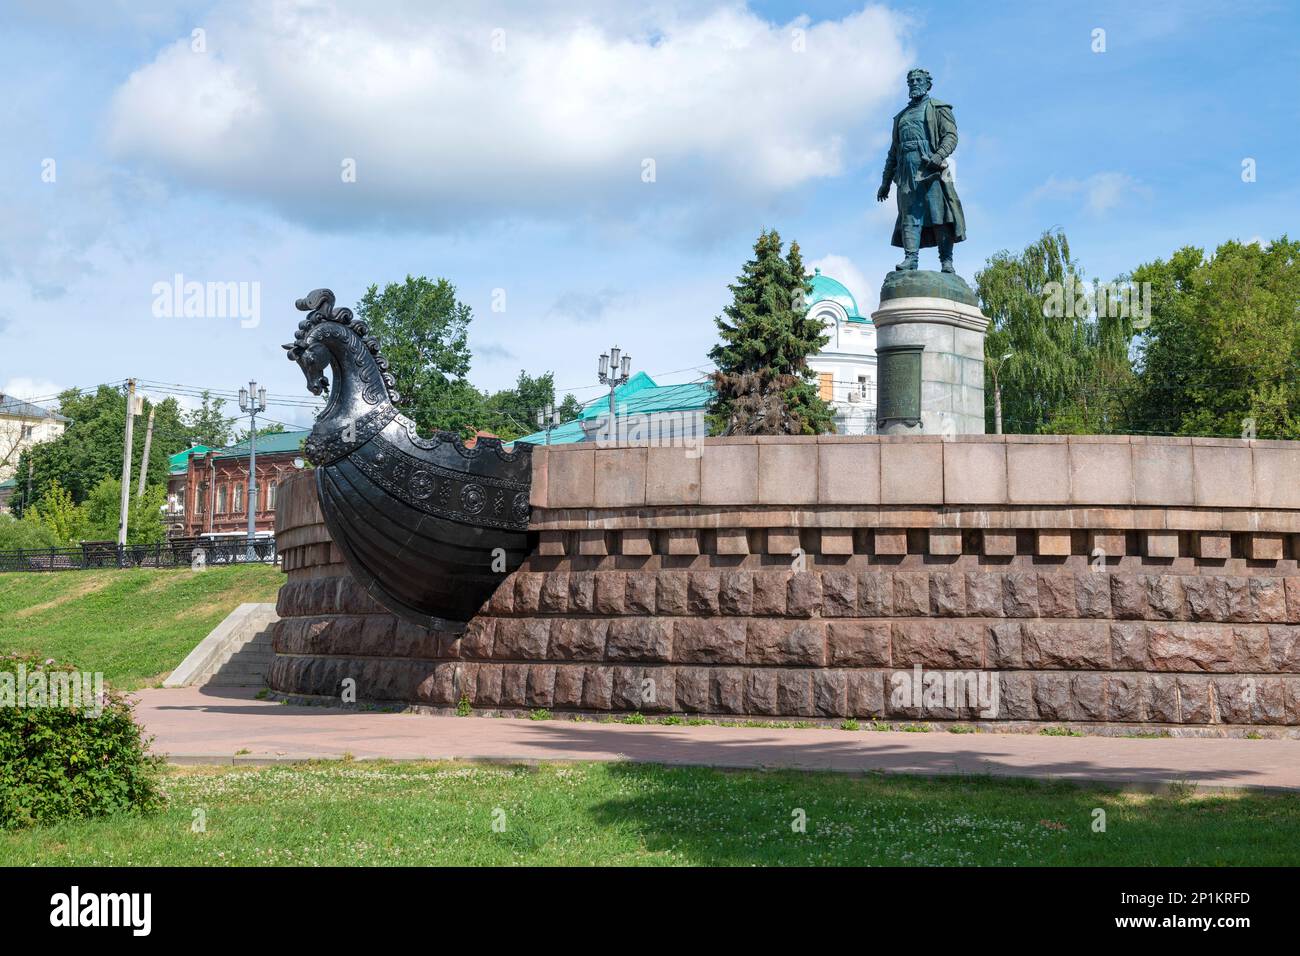 TVER, RUSSIA - JULY 15, 2022: Monument to Russian traveler Afanasy Nikitin on a sunny July day Stock Photo